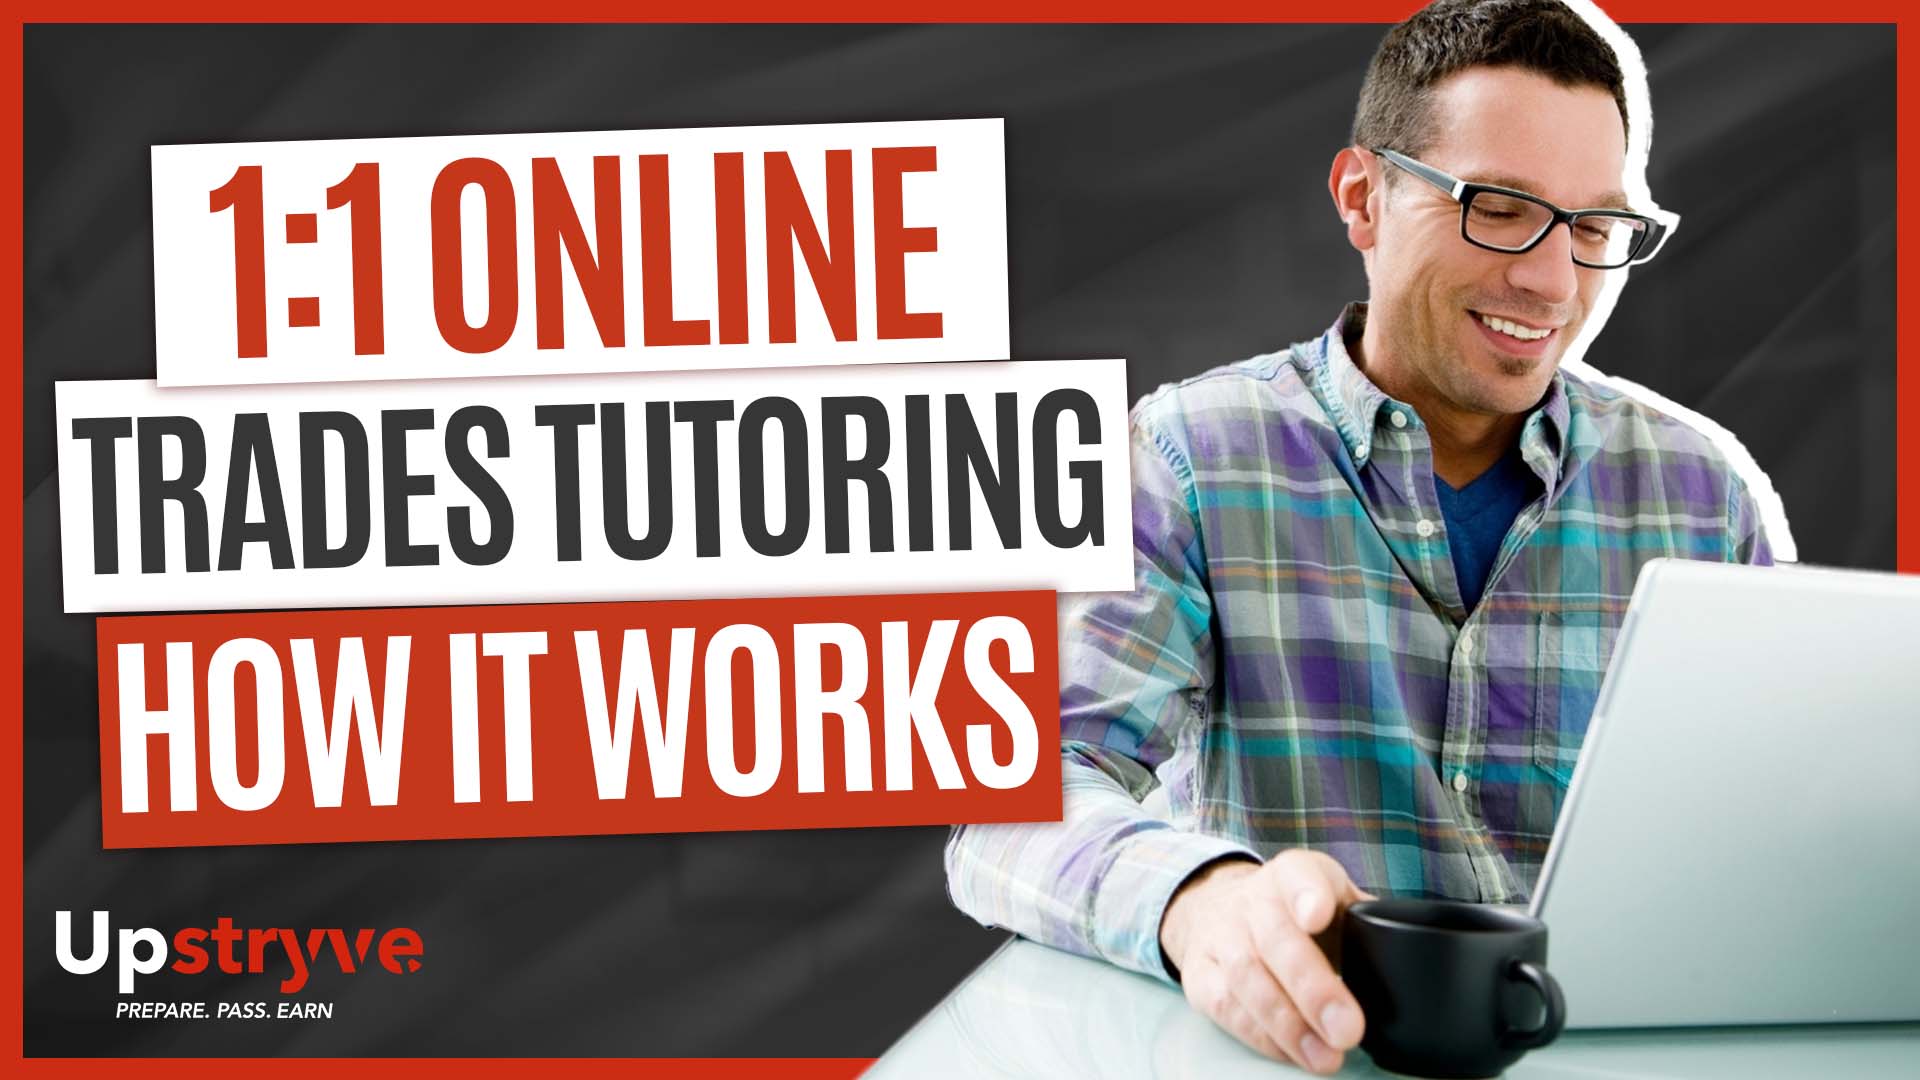 Upstryve is the only tutoring platform dedicated to providing tradespeople an affordable all-encompassing learning experience.